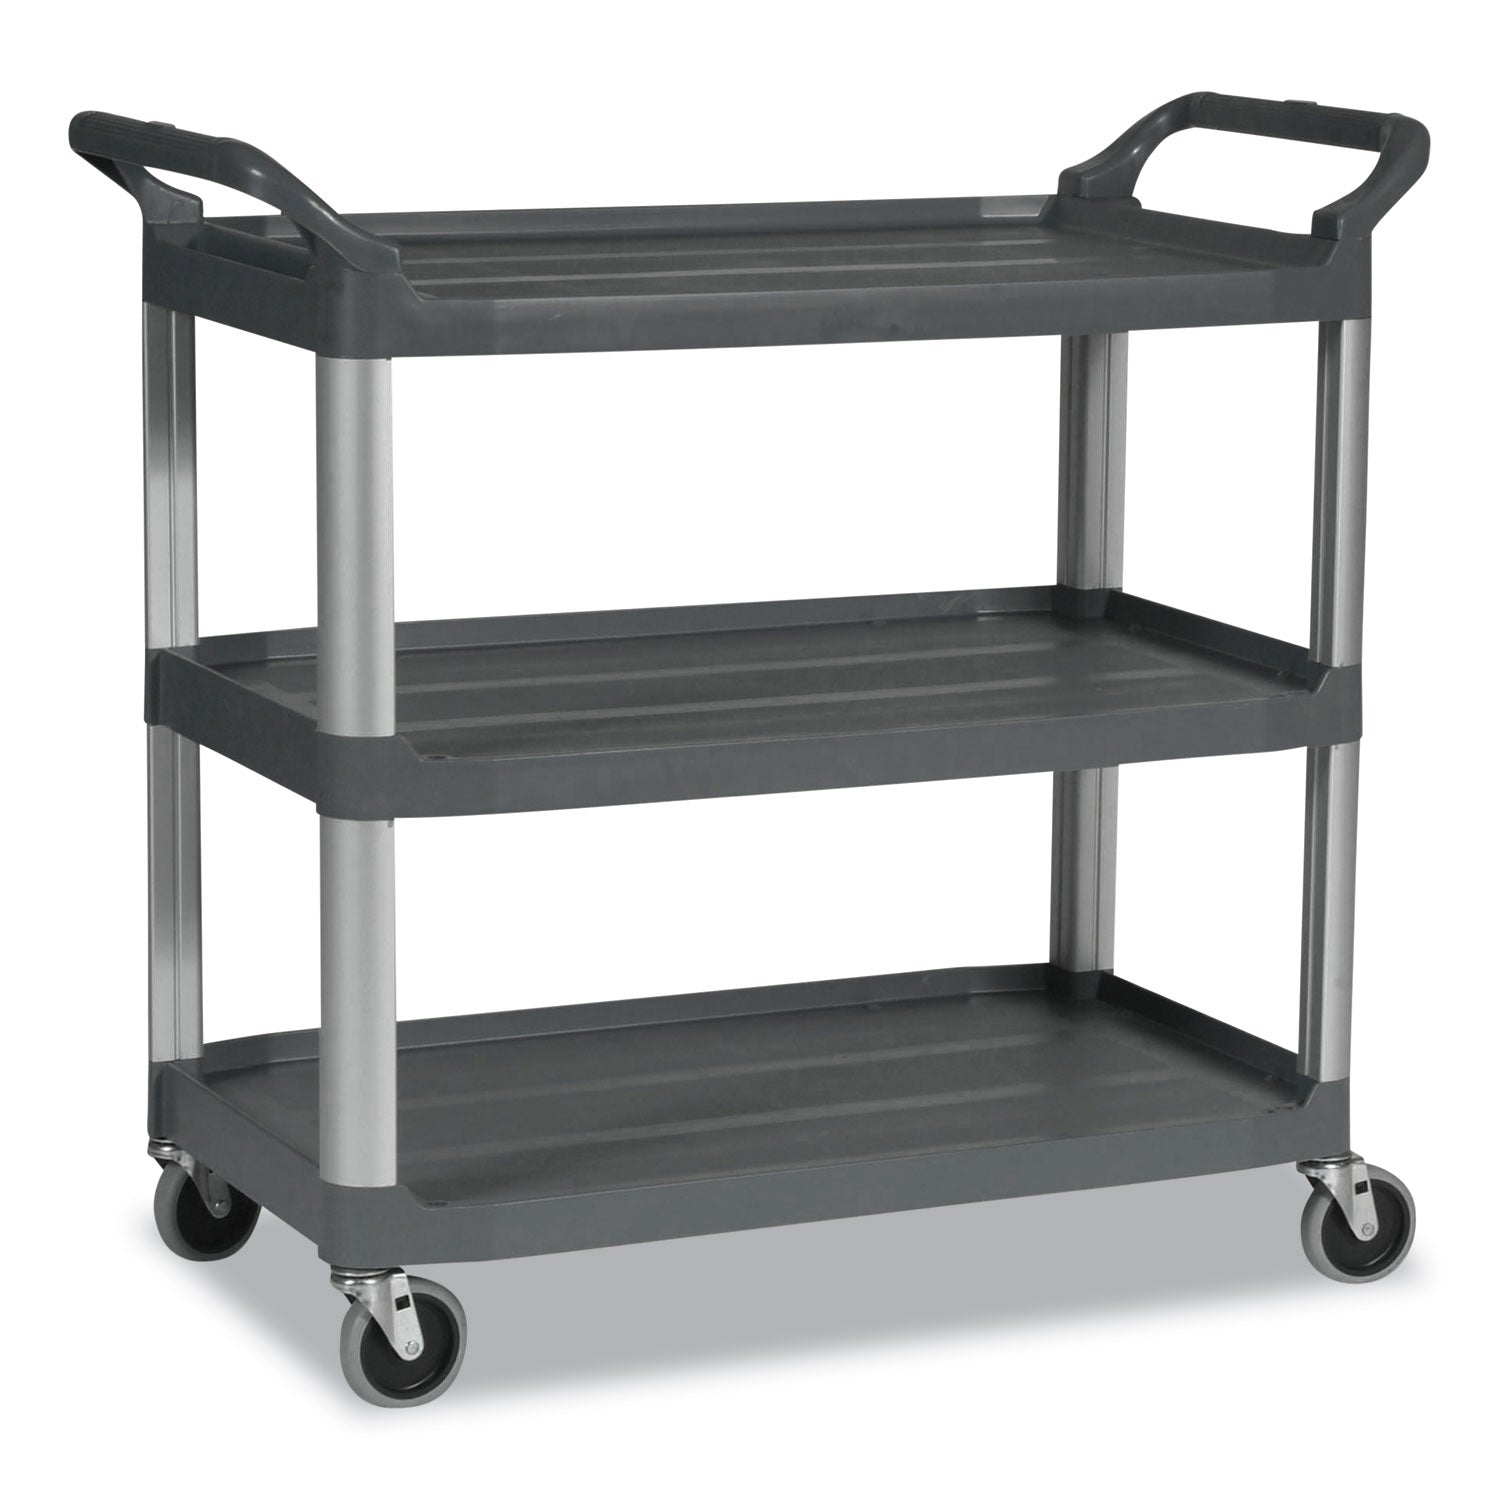 xtra-utility-cart-with-open-sides-plastic-3-shelves-300-lb-capacity-20-x-4063-x-378-gray_rcp4091gra - 3